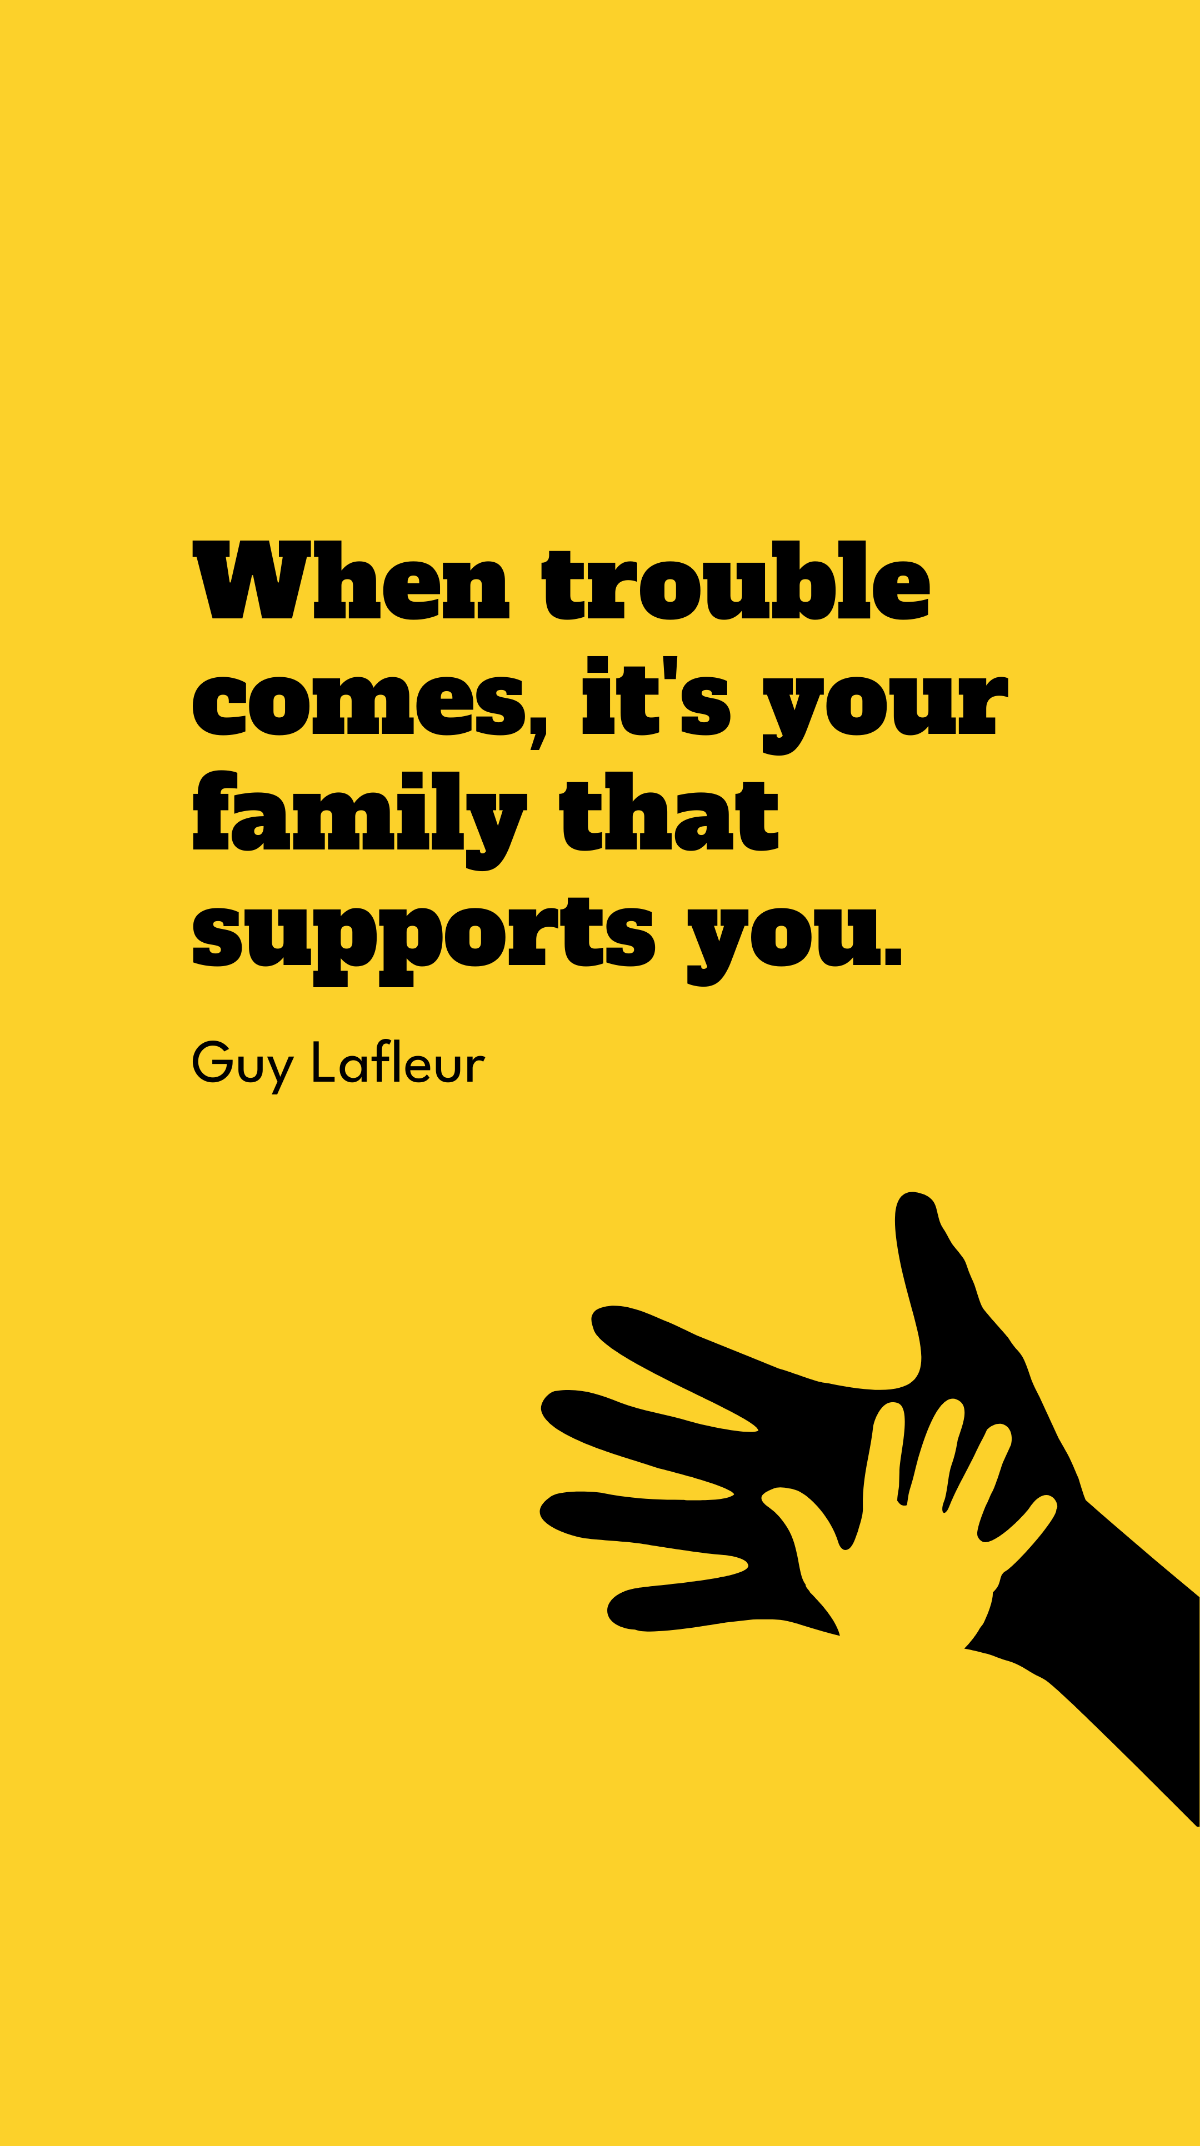 Guy Lafleur - When trouble comes, it's your family that supports you. Template